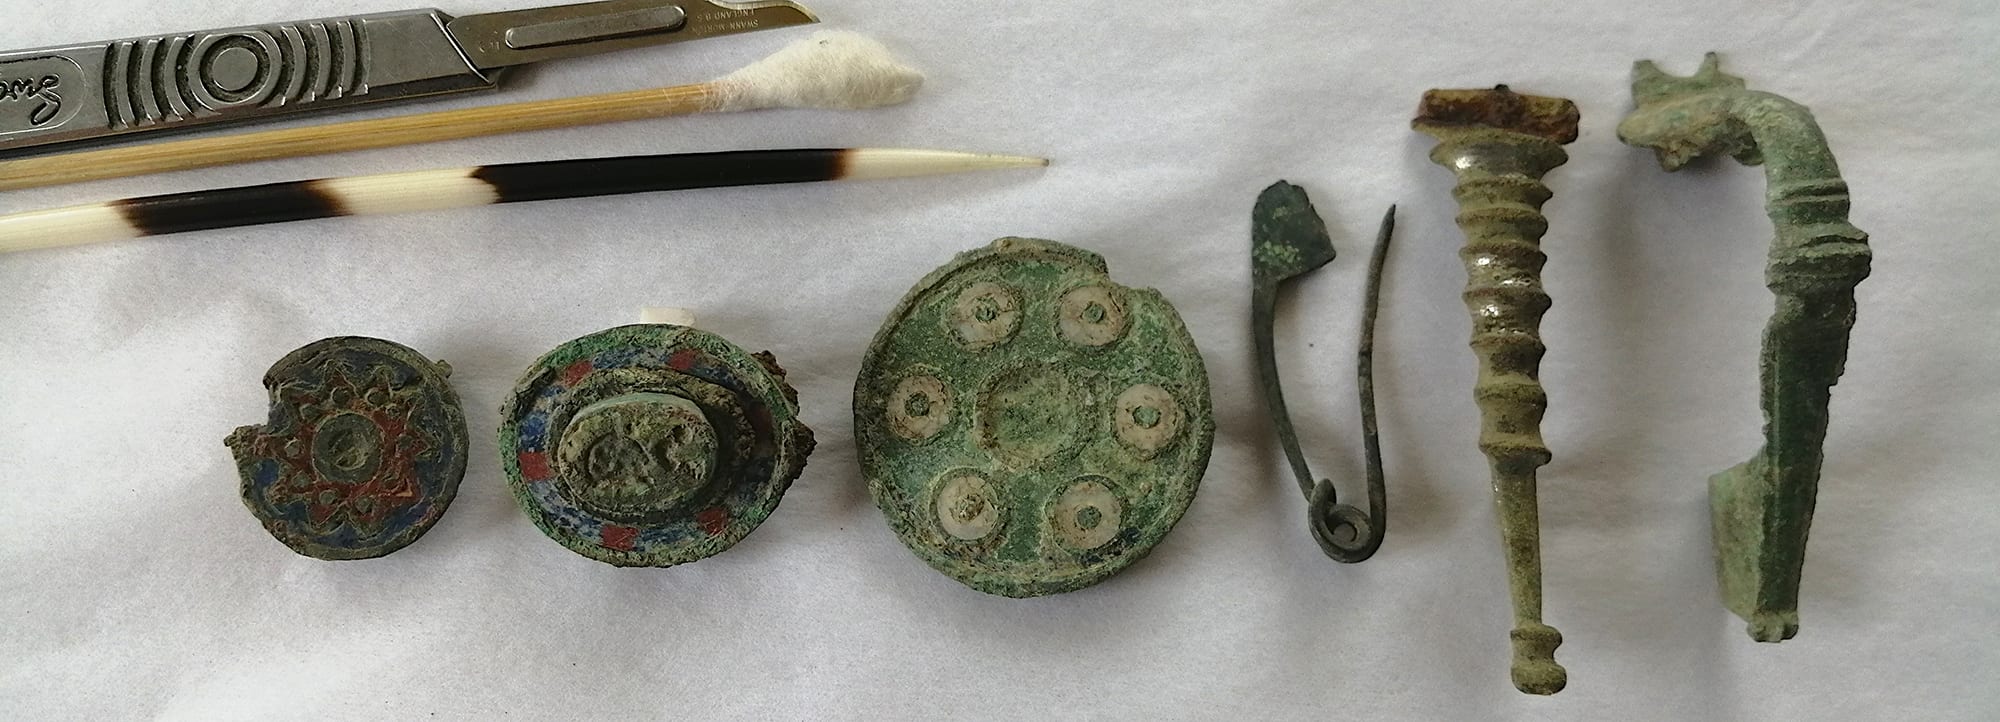 Metal Conservation – Brooches, Copper Alloy and Cleaning